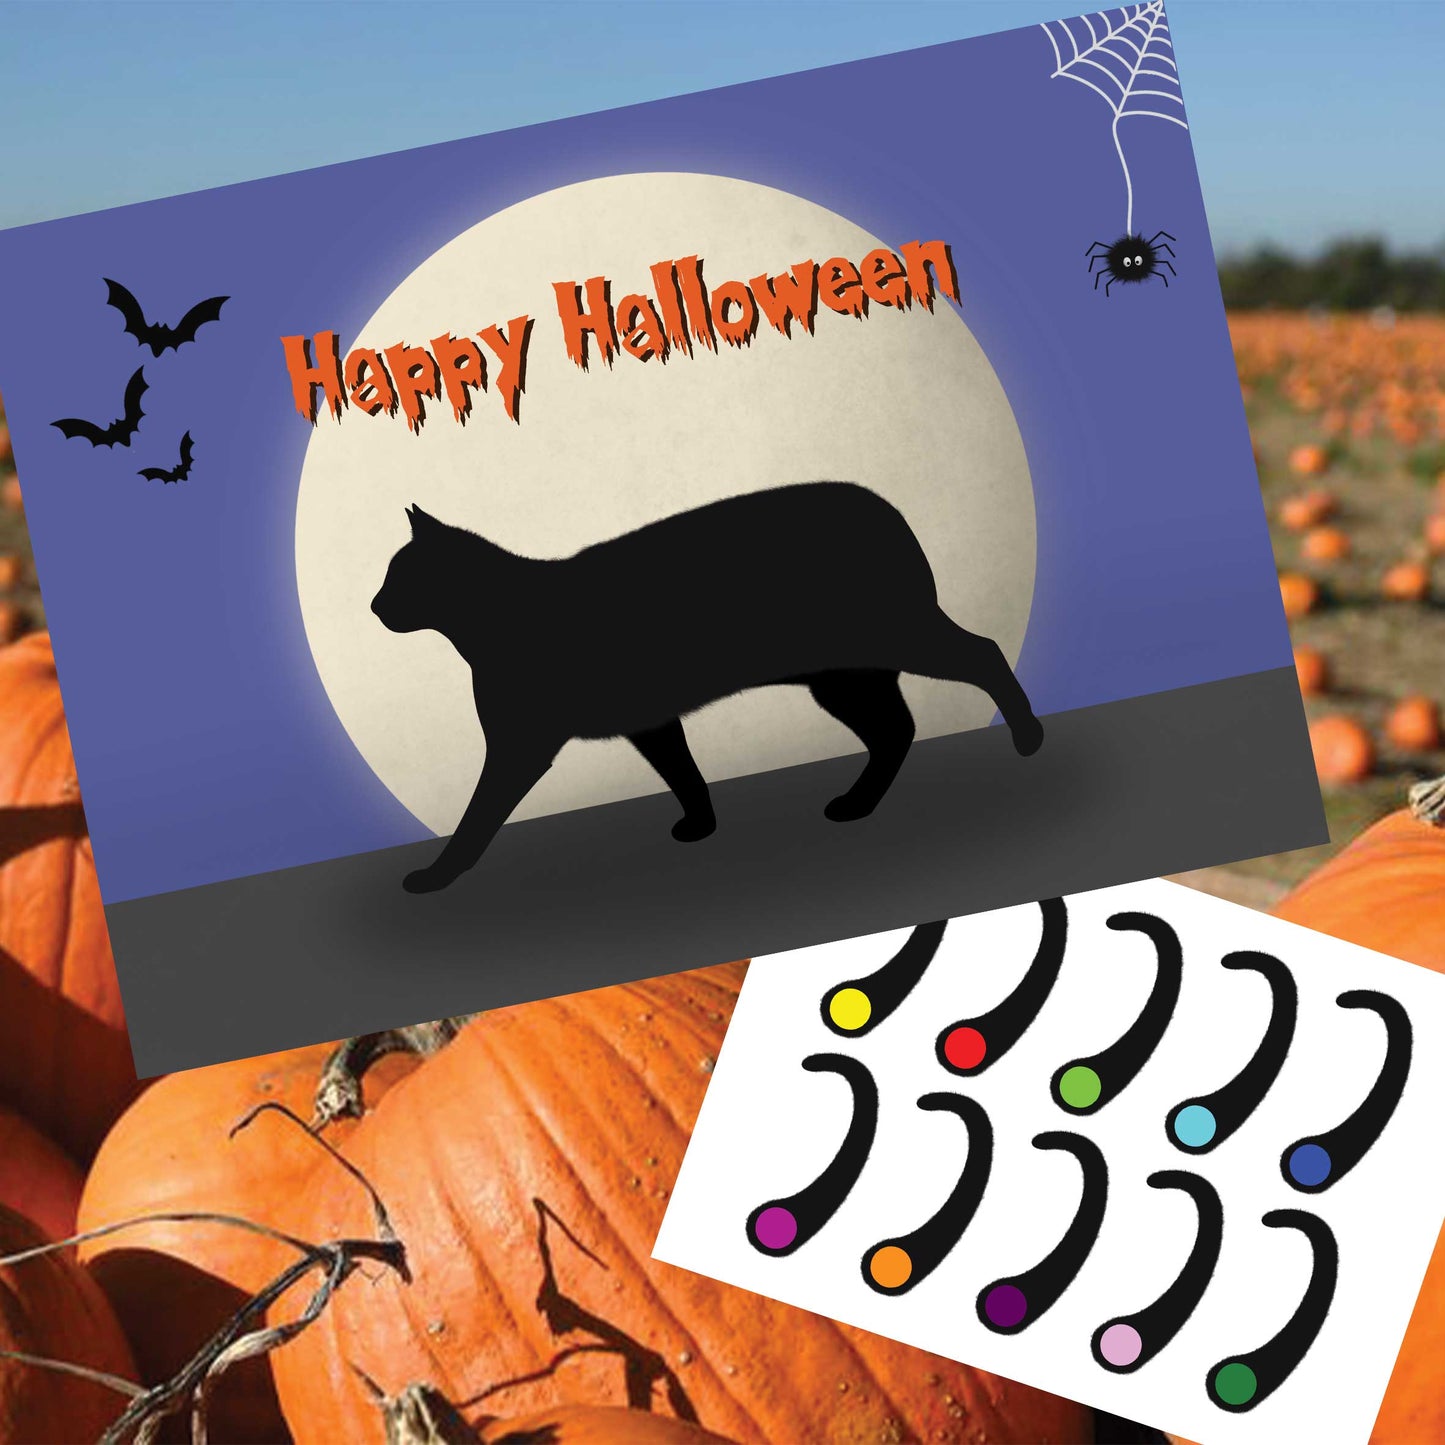 Pin The Tail on The Black Cat - Halloween Game FREE